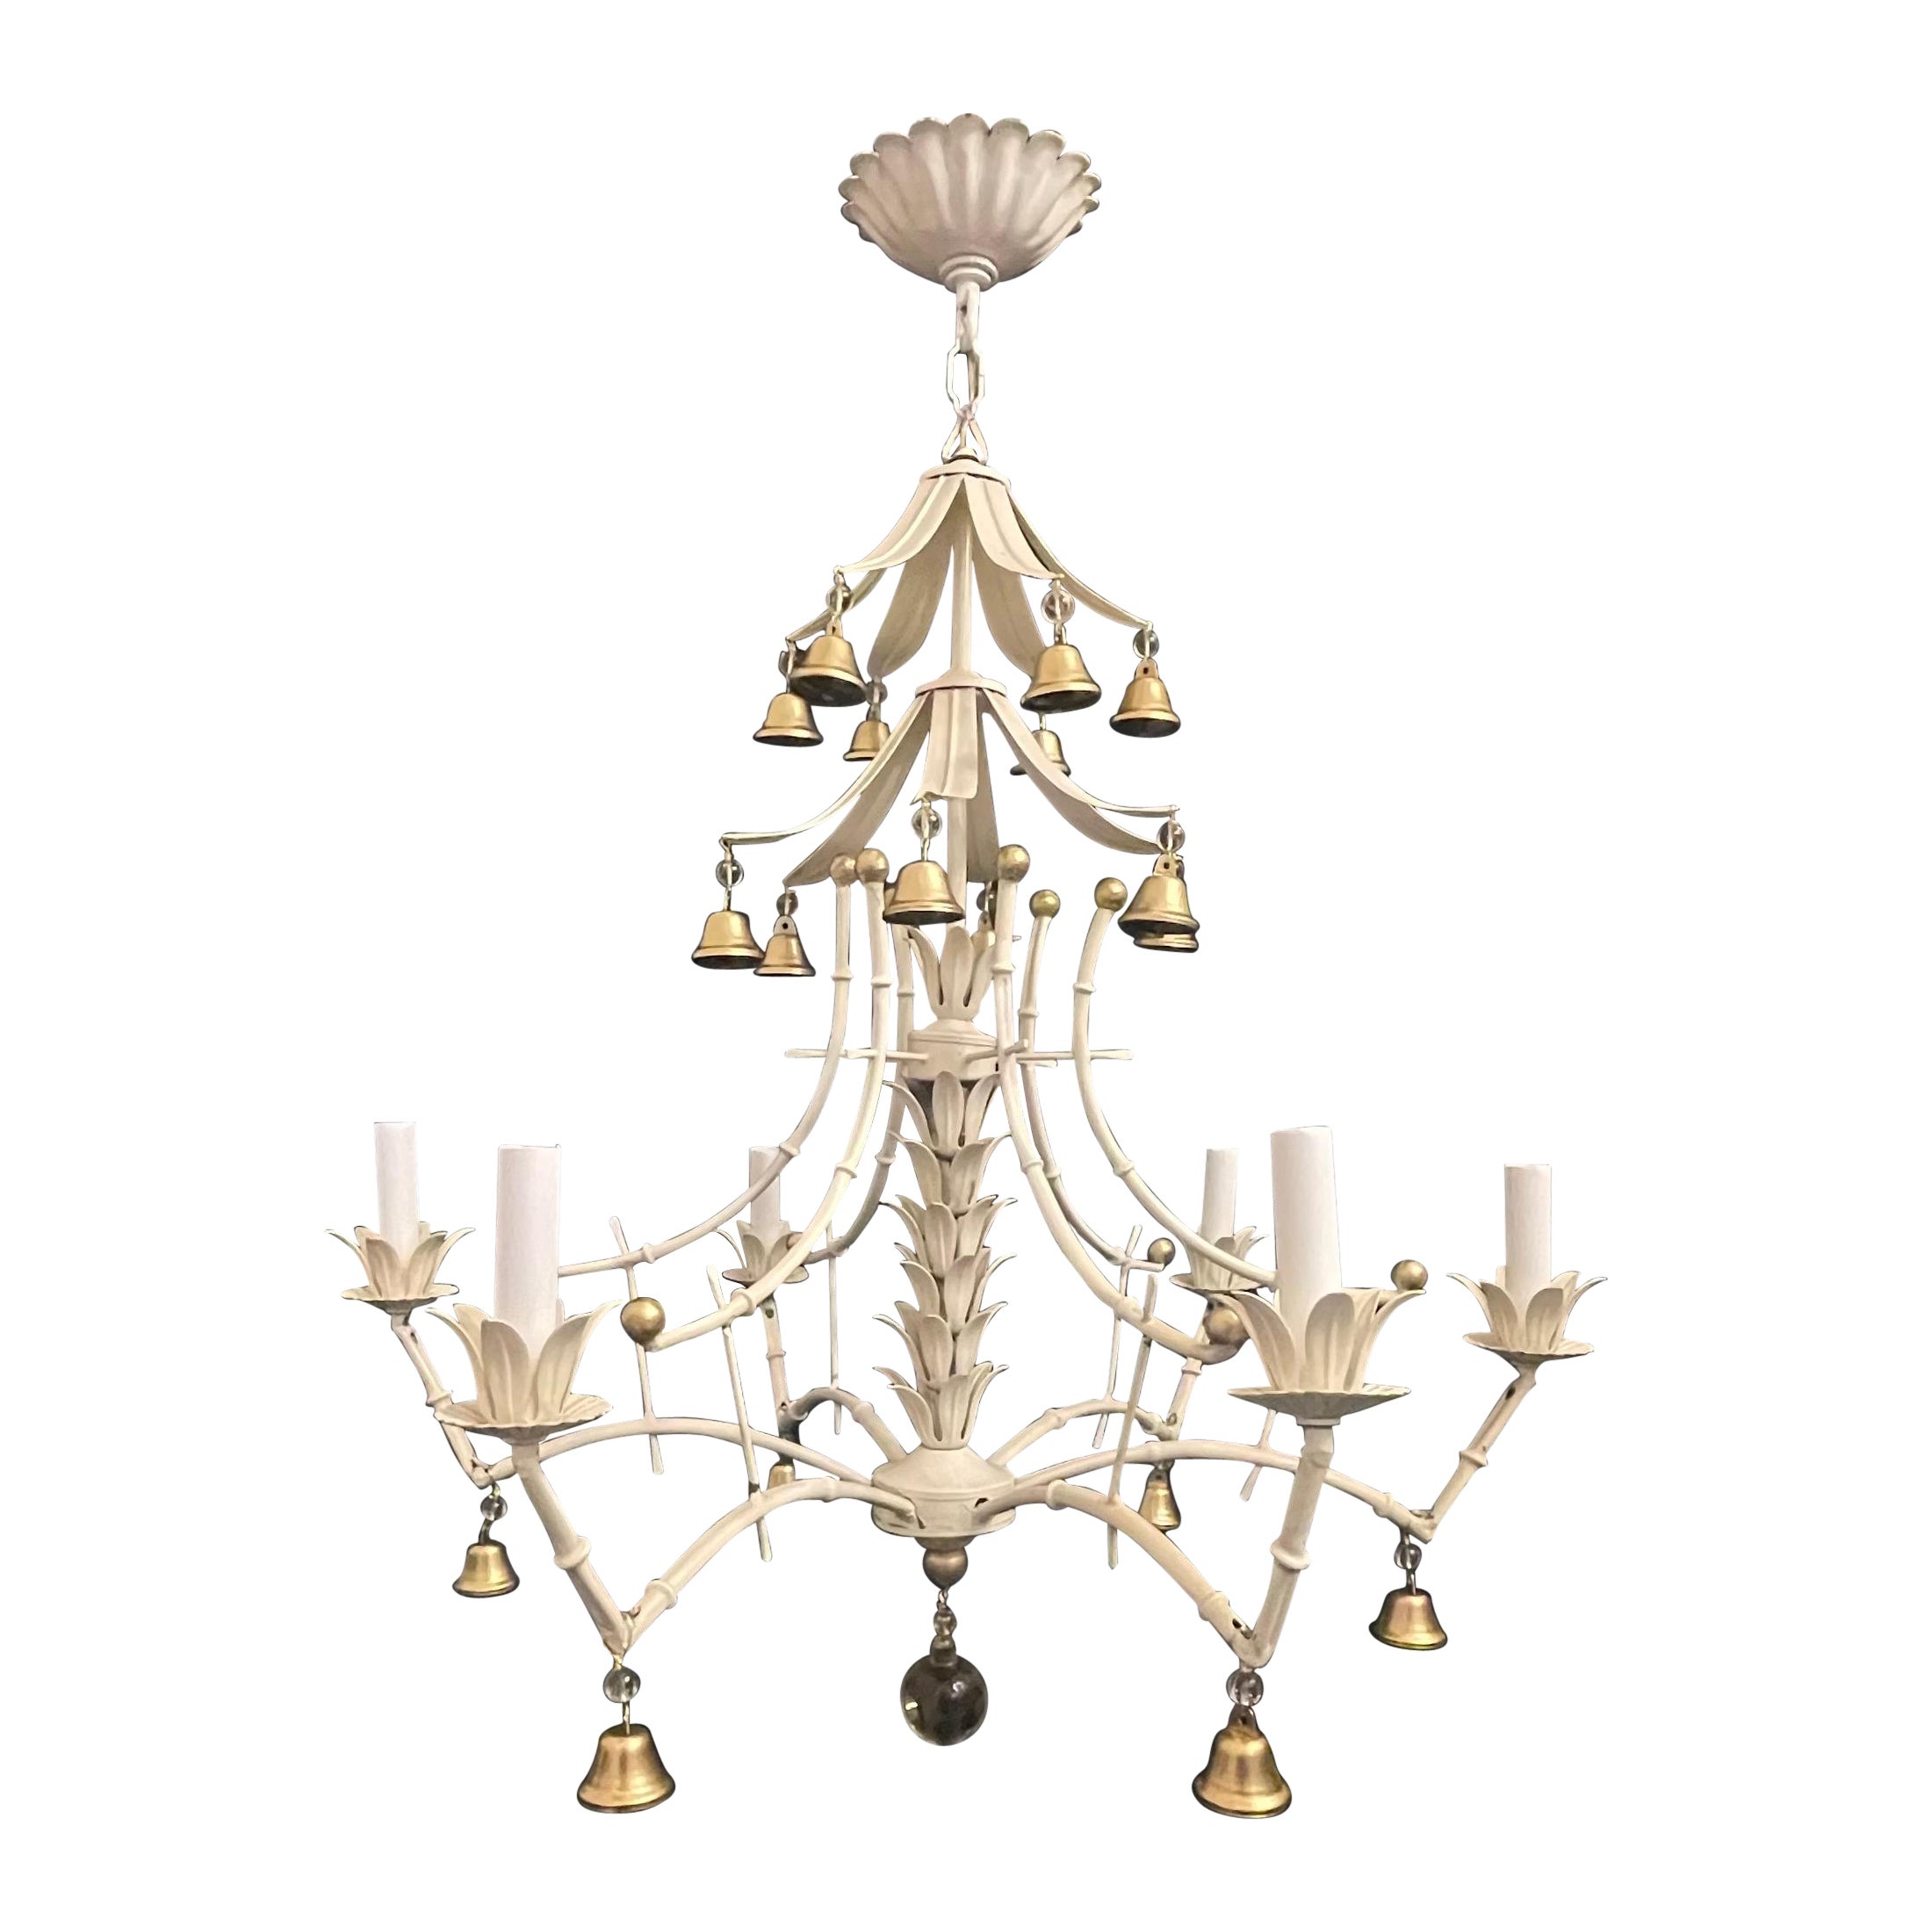 Vintage Faux Bamboo Pagoda Tole White Gold Gilt Metal Palm Beach Chandelier